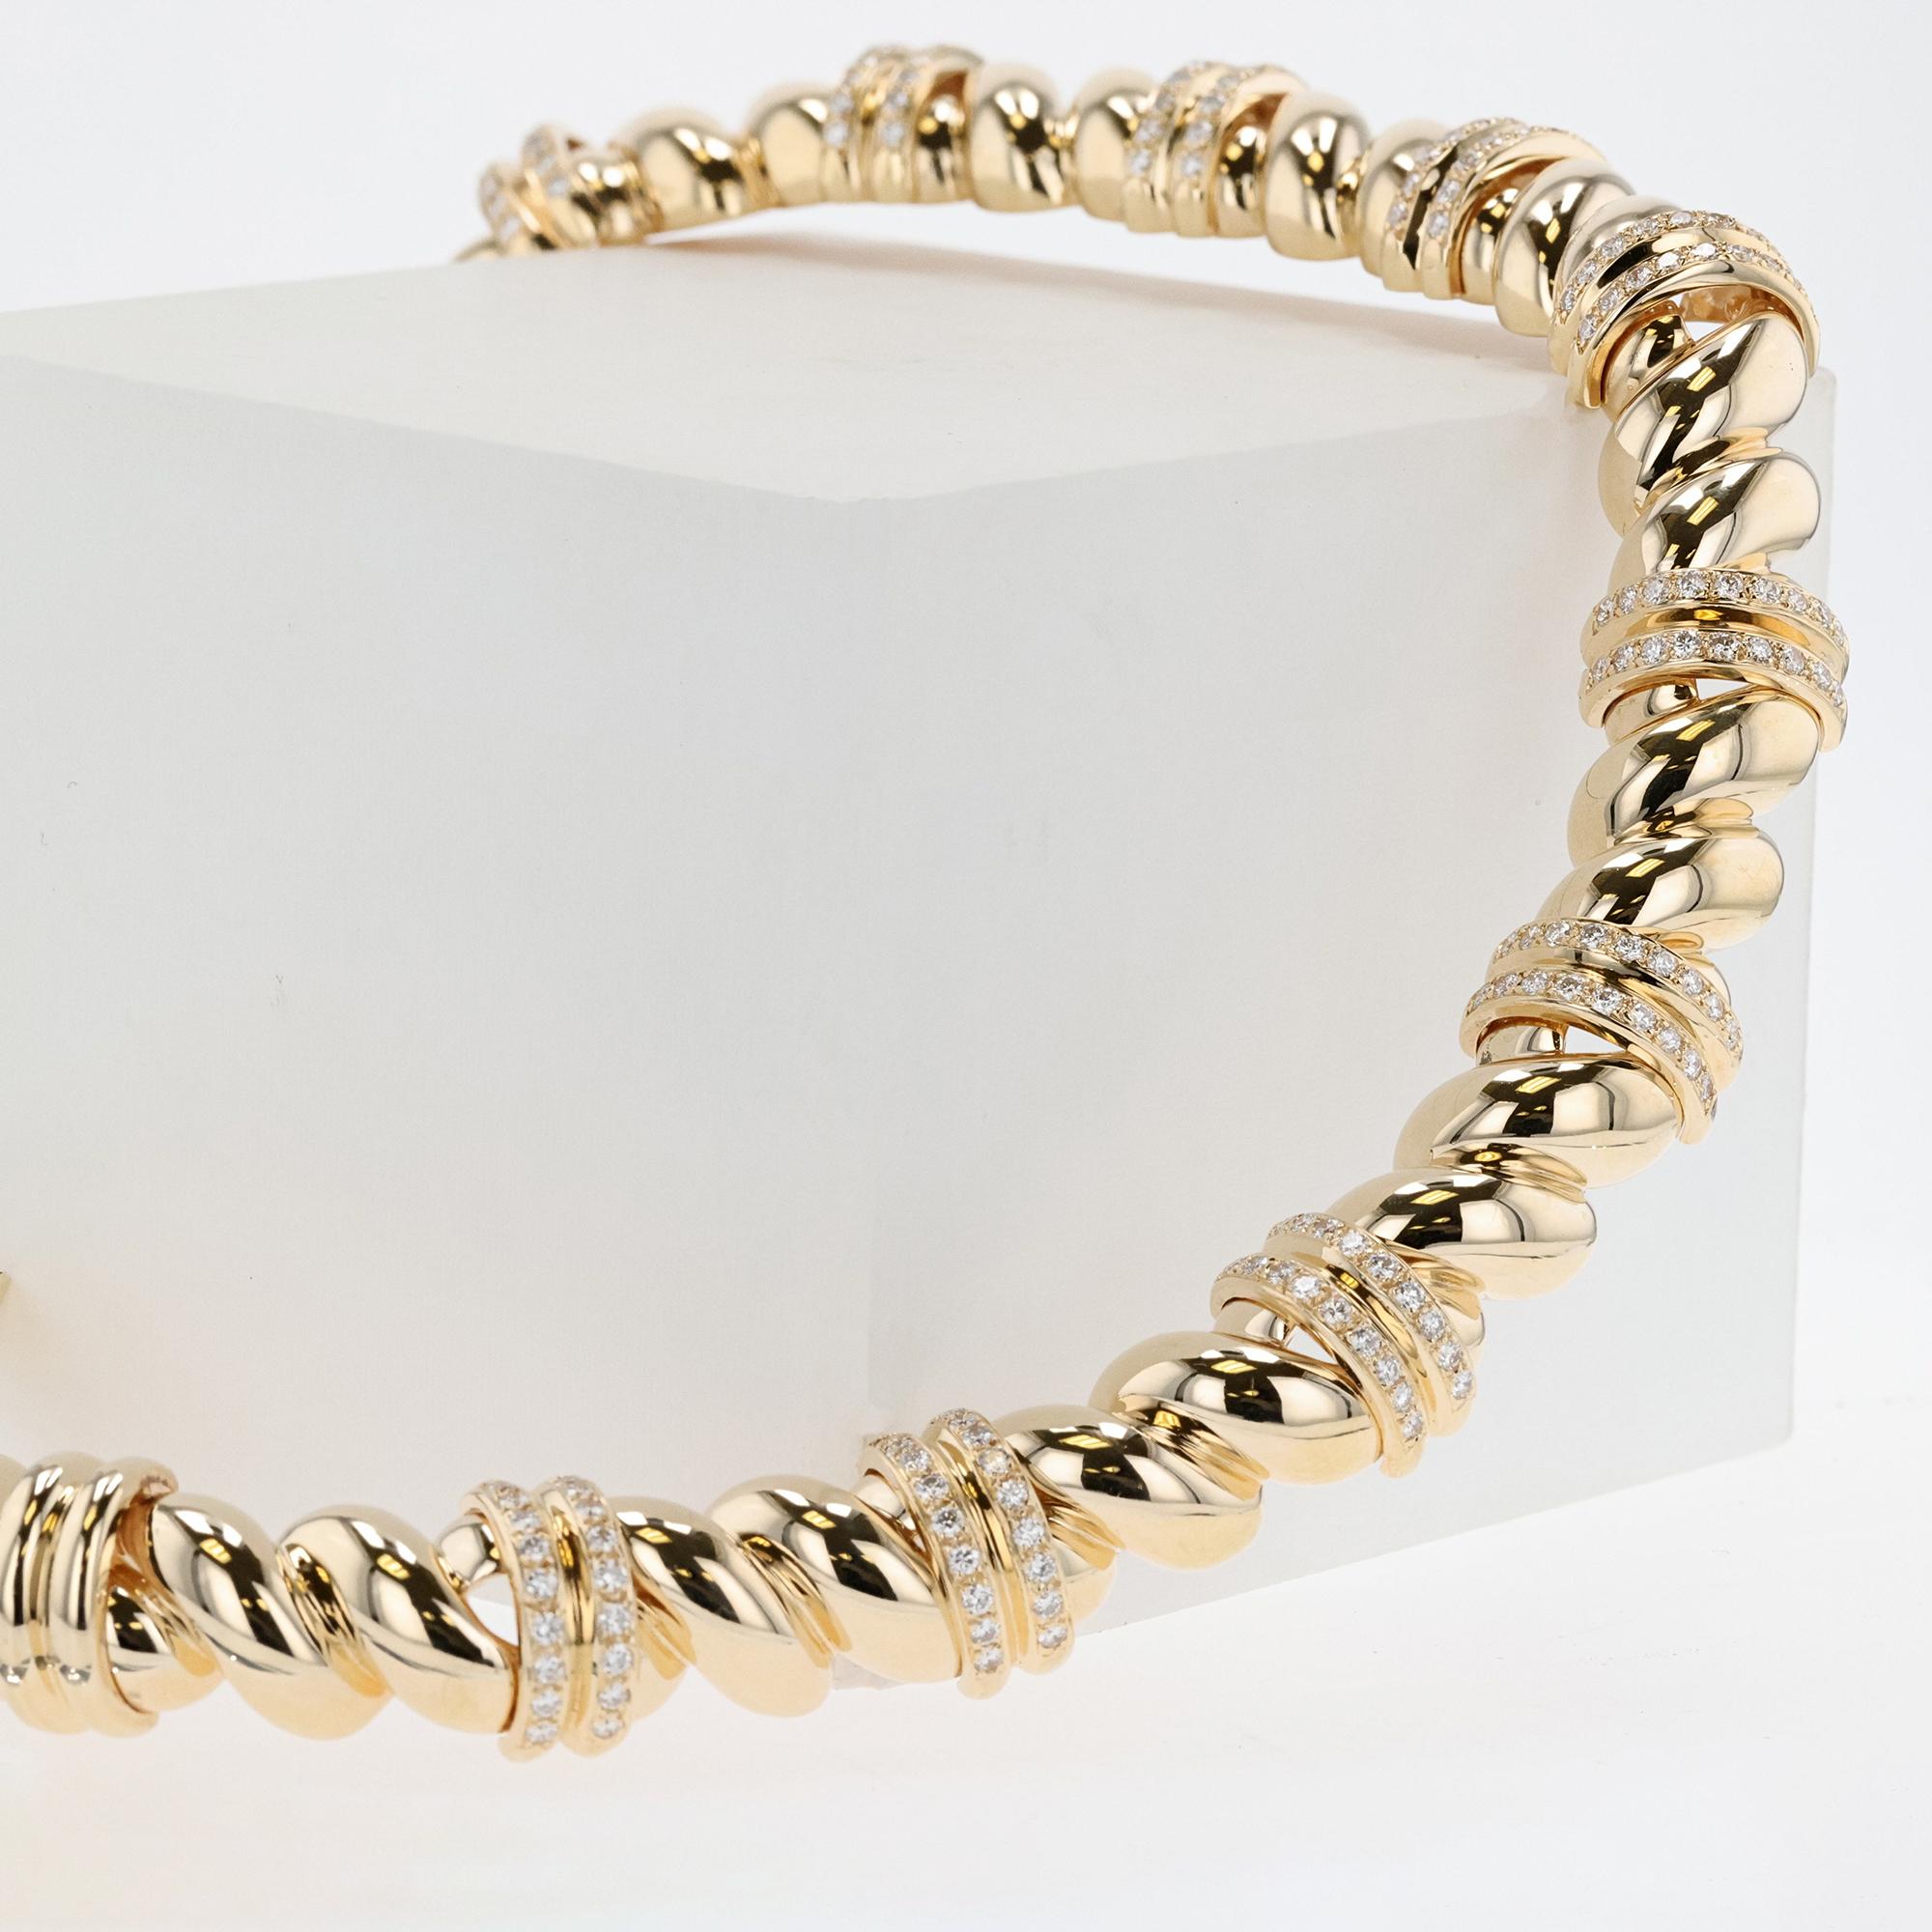 Vintage Gold and Diamond Collar Necklace In Excellent Condition For Sale In Princeton, NJ